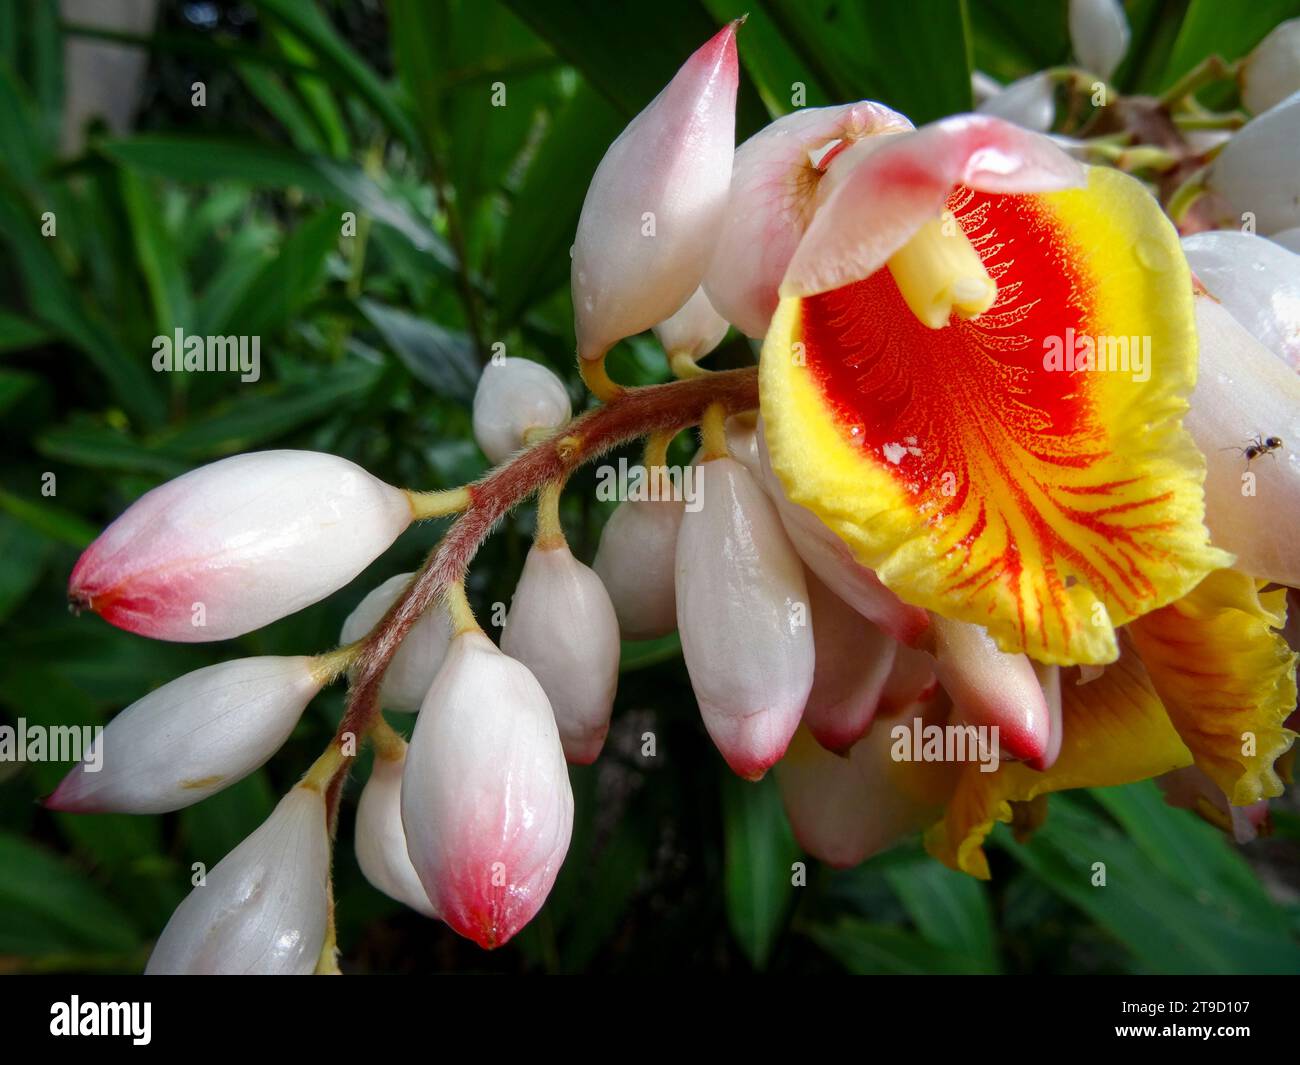 Natural close up flowering plant portrait of the stunning Pachira Aquatica, blooming. High resolution Stock Photo